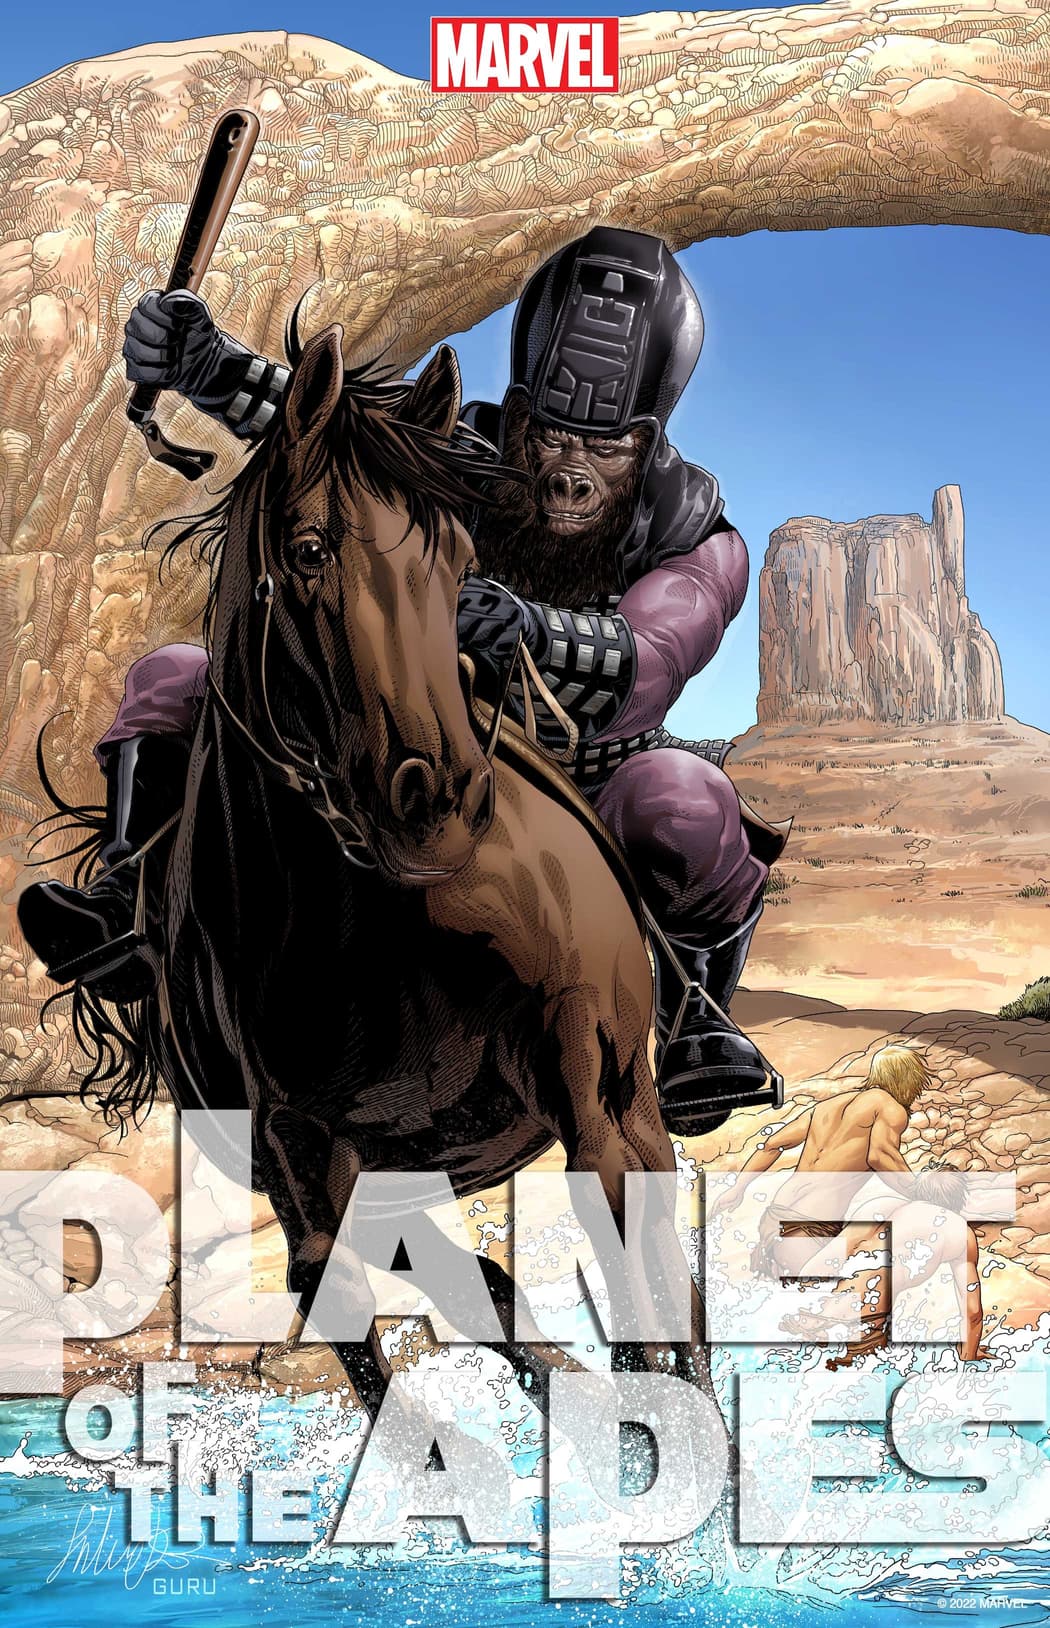 PLANET OF THE APES teaser by Salvador Larroca